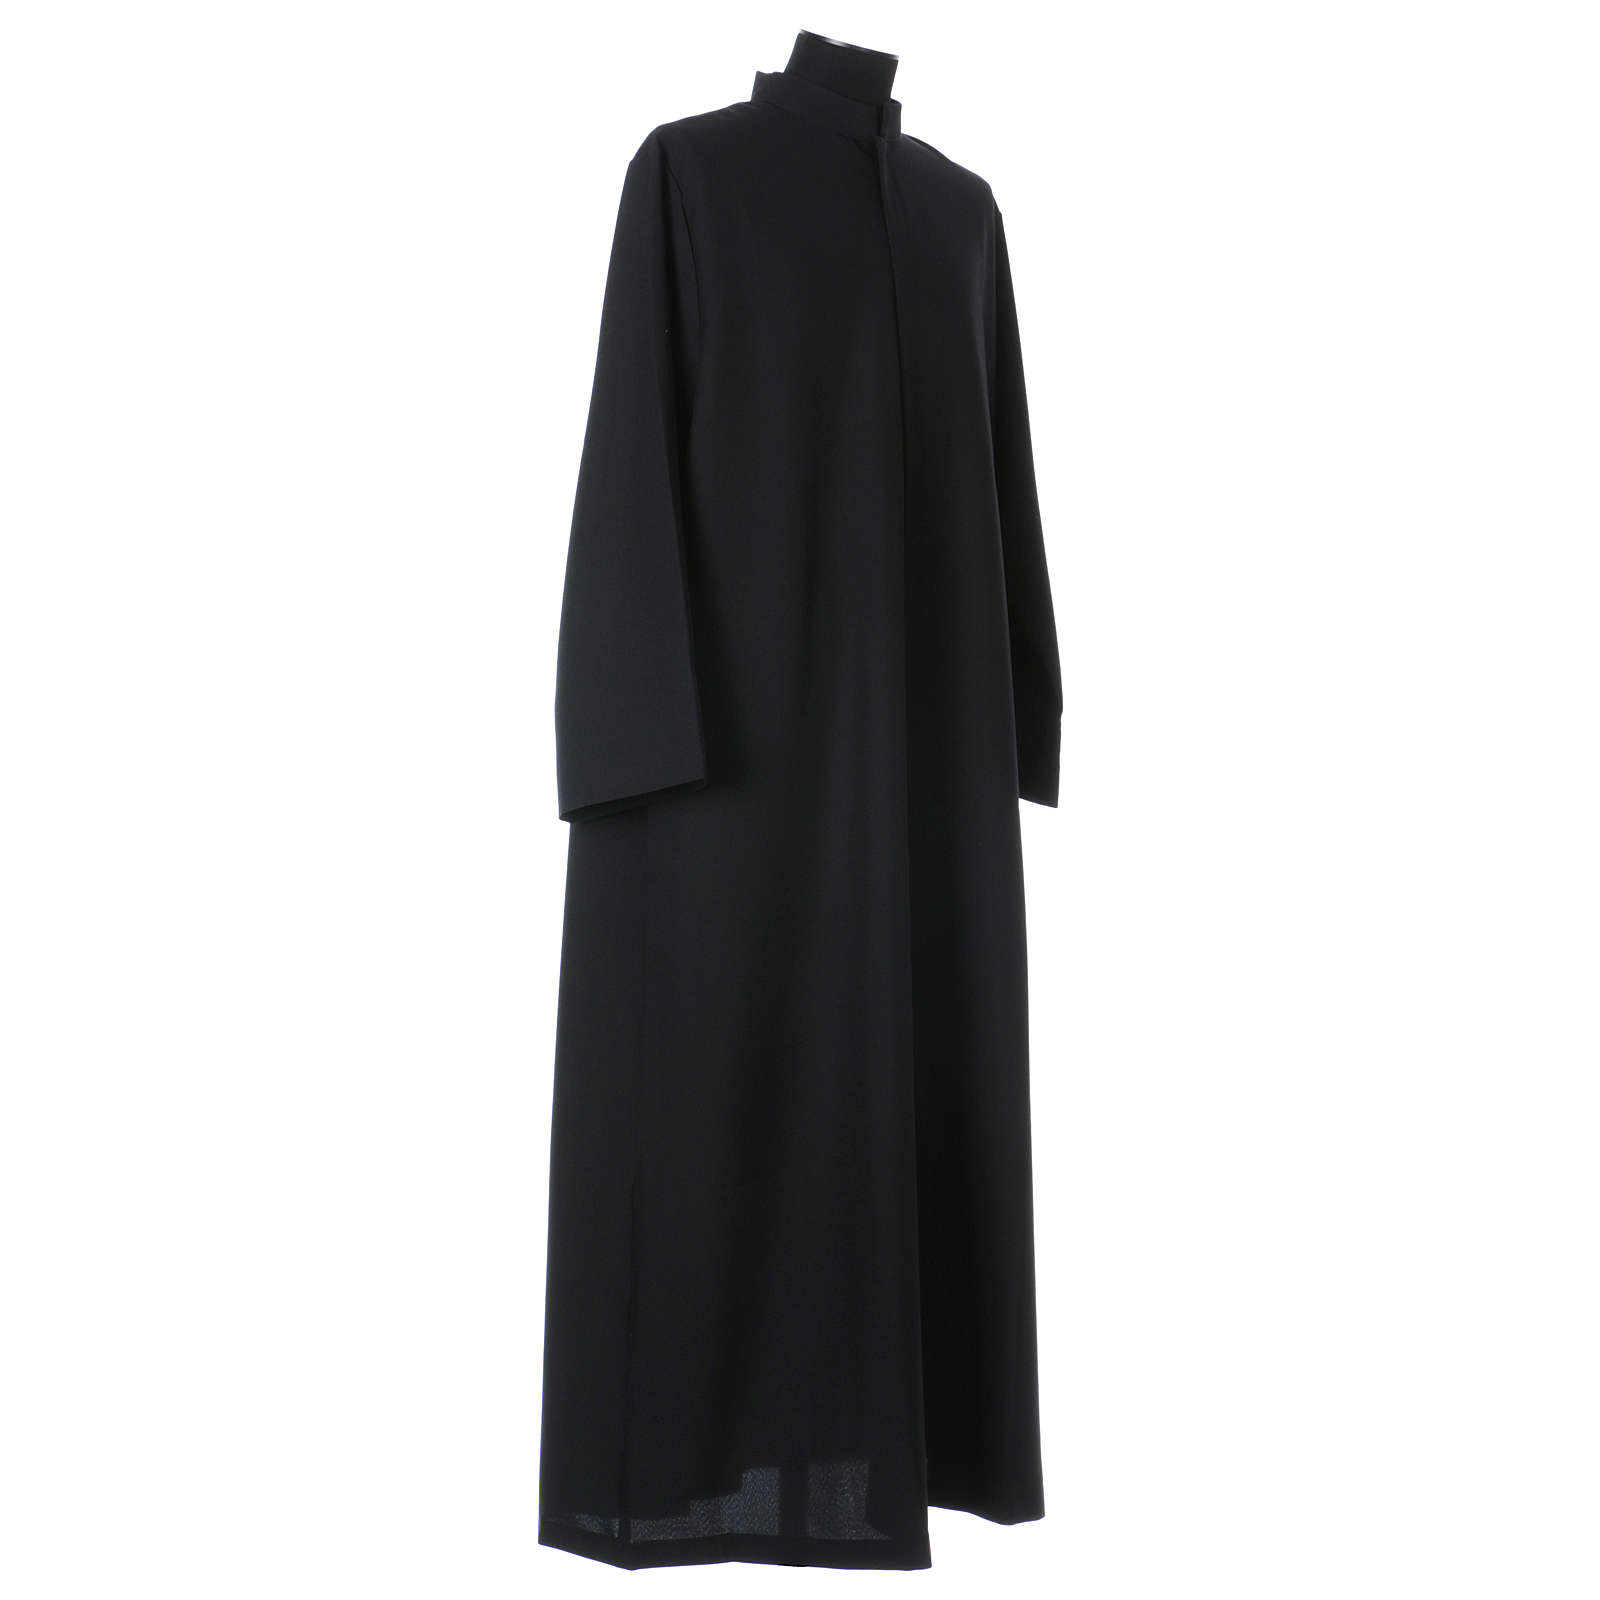 Cassock with concealed zipper | online sales on HOLYART.co.uk